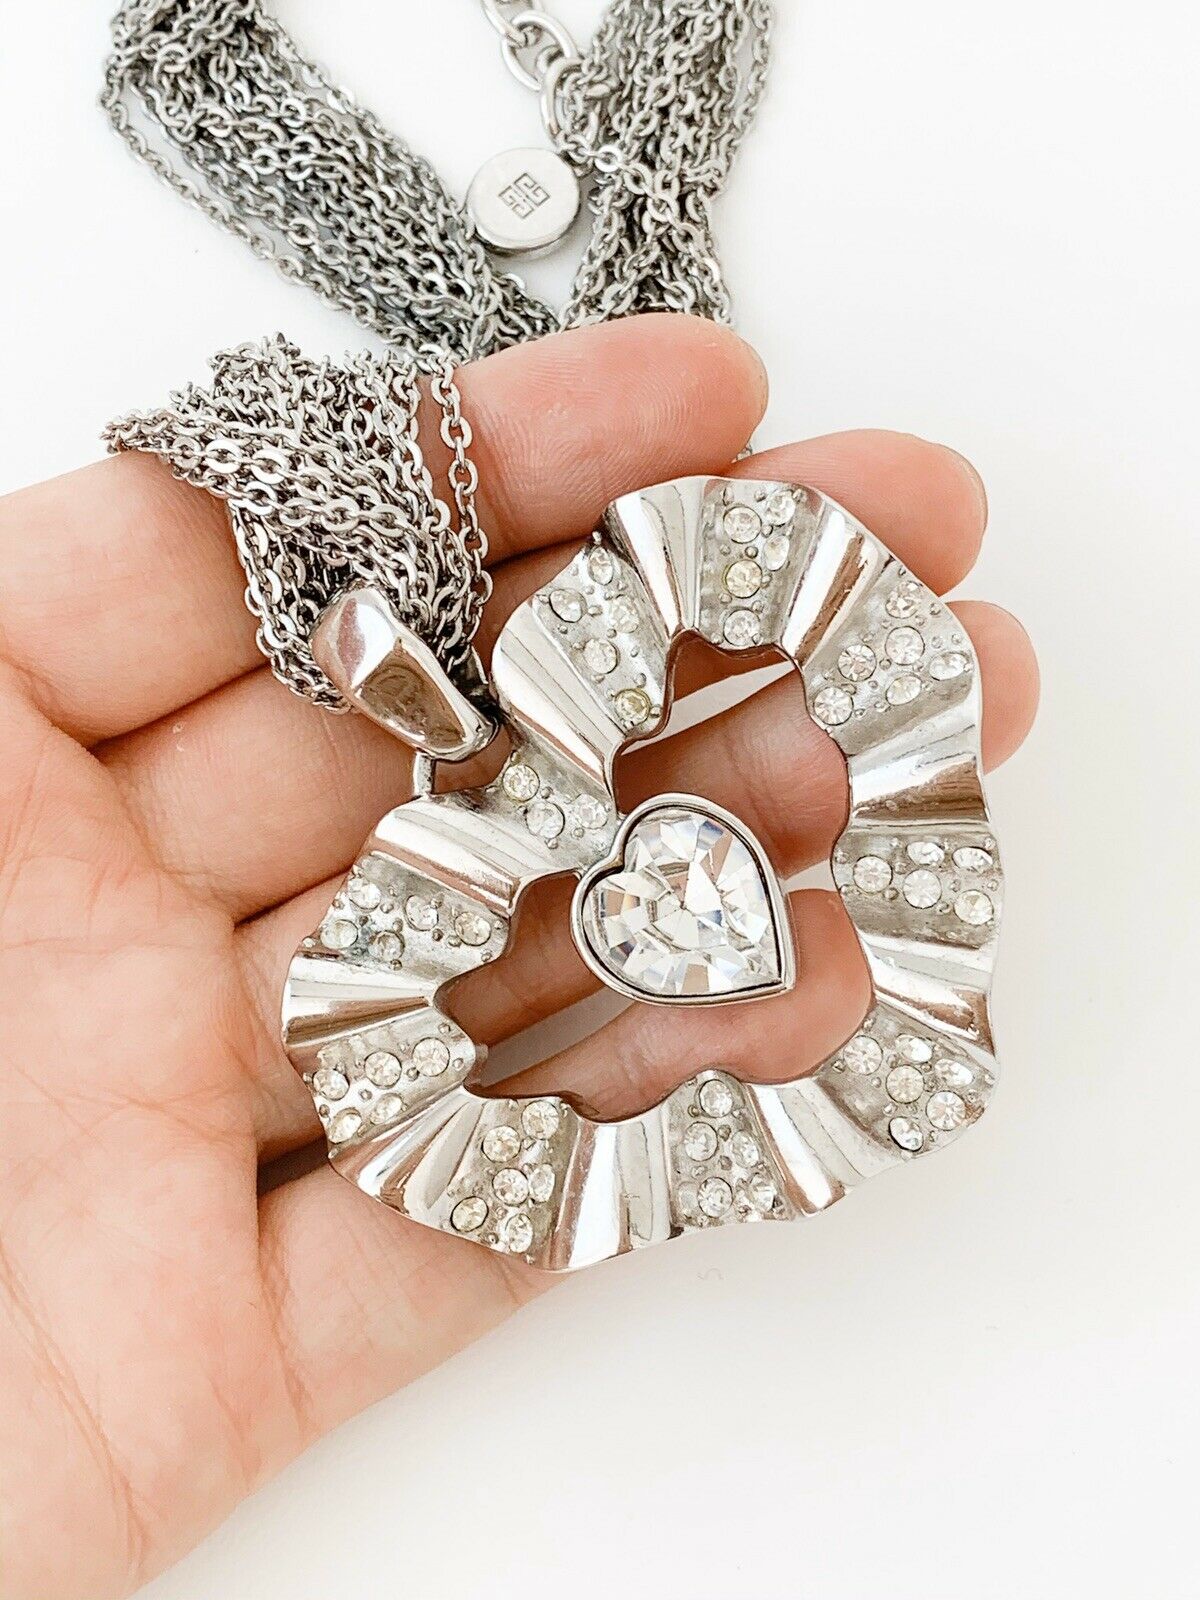 Givenchy Extra Large Heart Necklace Silver Tone Crystals Gorgeous